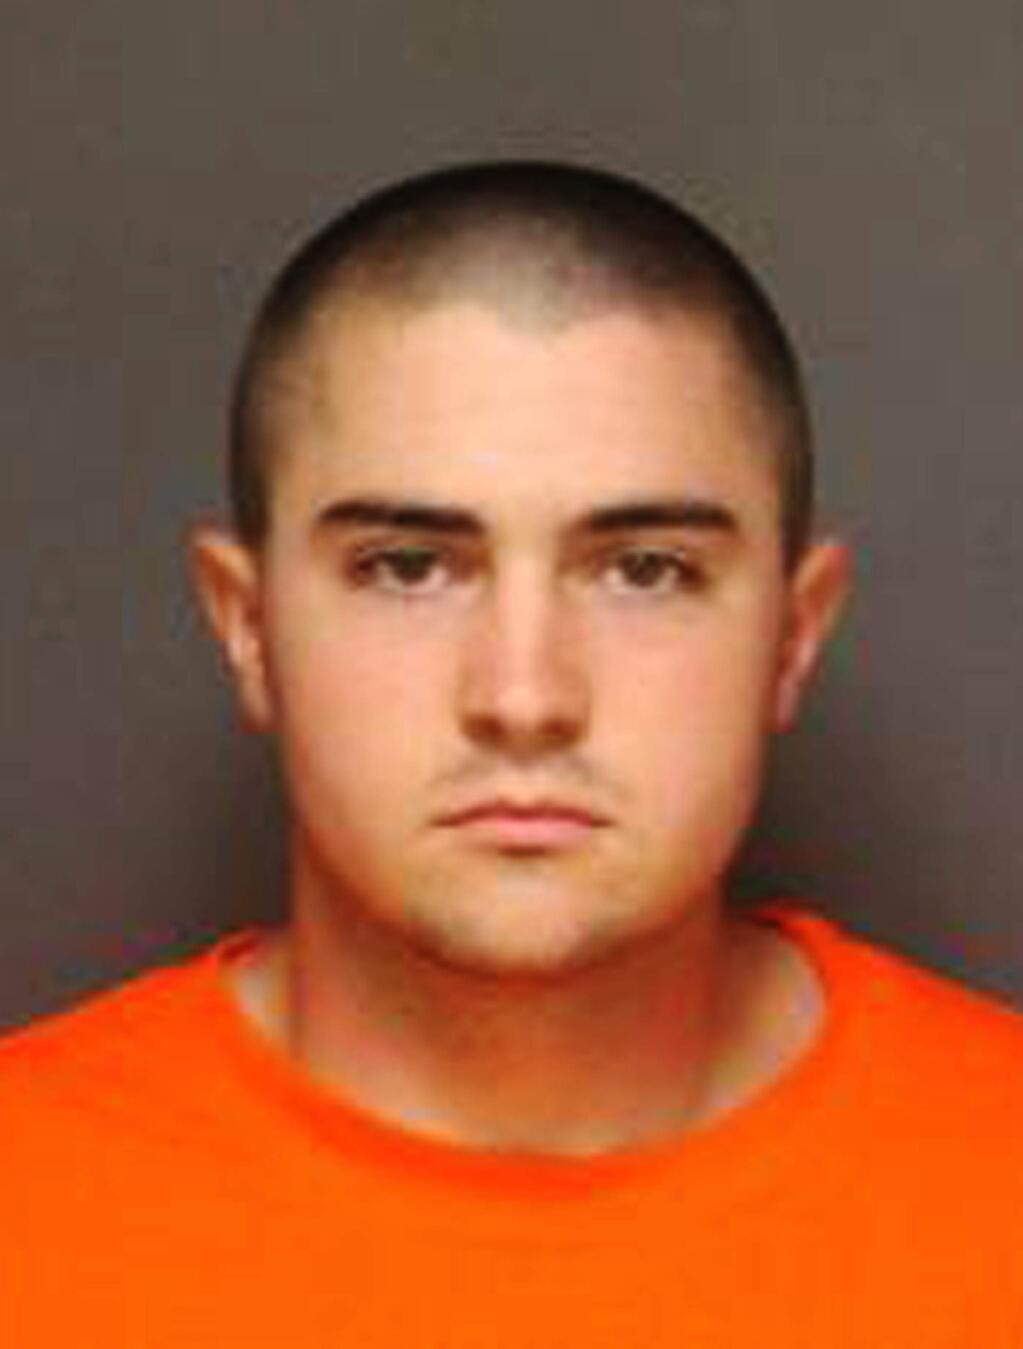 This photo released by the Fullerton, Calif., Police Department shows Josh Acosta, 21, arrested and jailed in Fullerton Sunday, Sept. 25, 2016. Acosta is one of two men arrested in connection with the murders of two men and a woman at a Fullerton home Saturday, Sept. 24. Two children were present in the home and called 911 to report that their parents had 'died.' (Fullerton Police Department via AP)